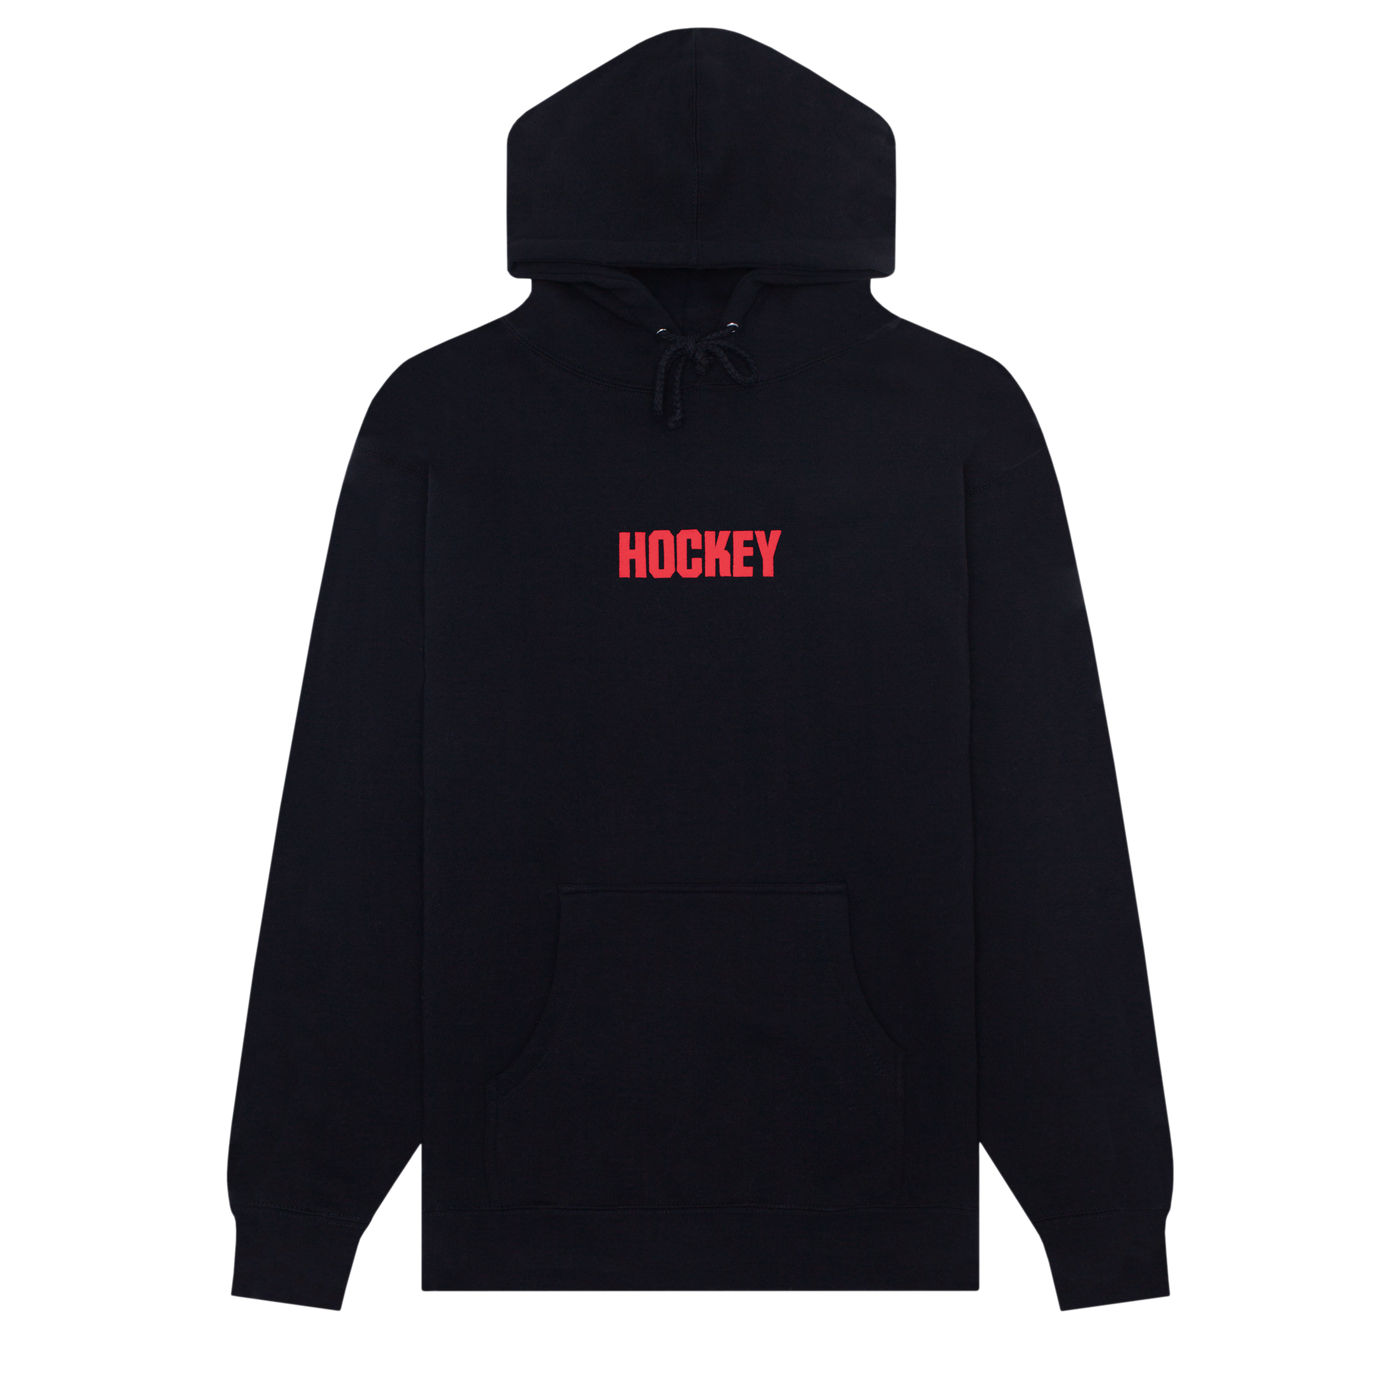 Electric Family™ on X: Black Friday limited edition “LIVE A LIFE YOU WILL  REMEMBER” fleece hockey jersey style hoodie 😍🔥 Enter our $4000  sweepstakes, get early access registration for the sale, and